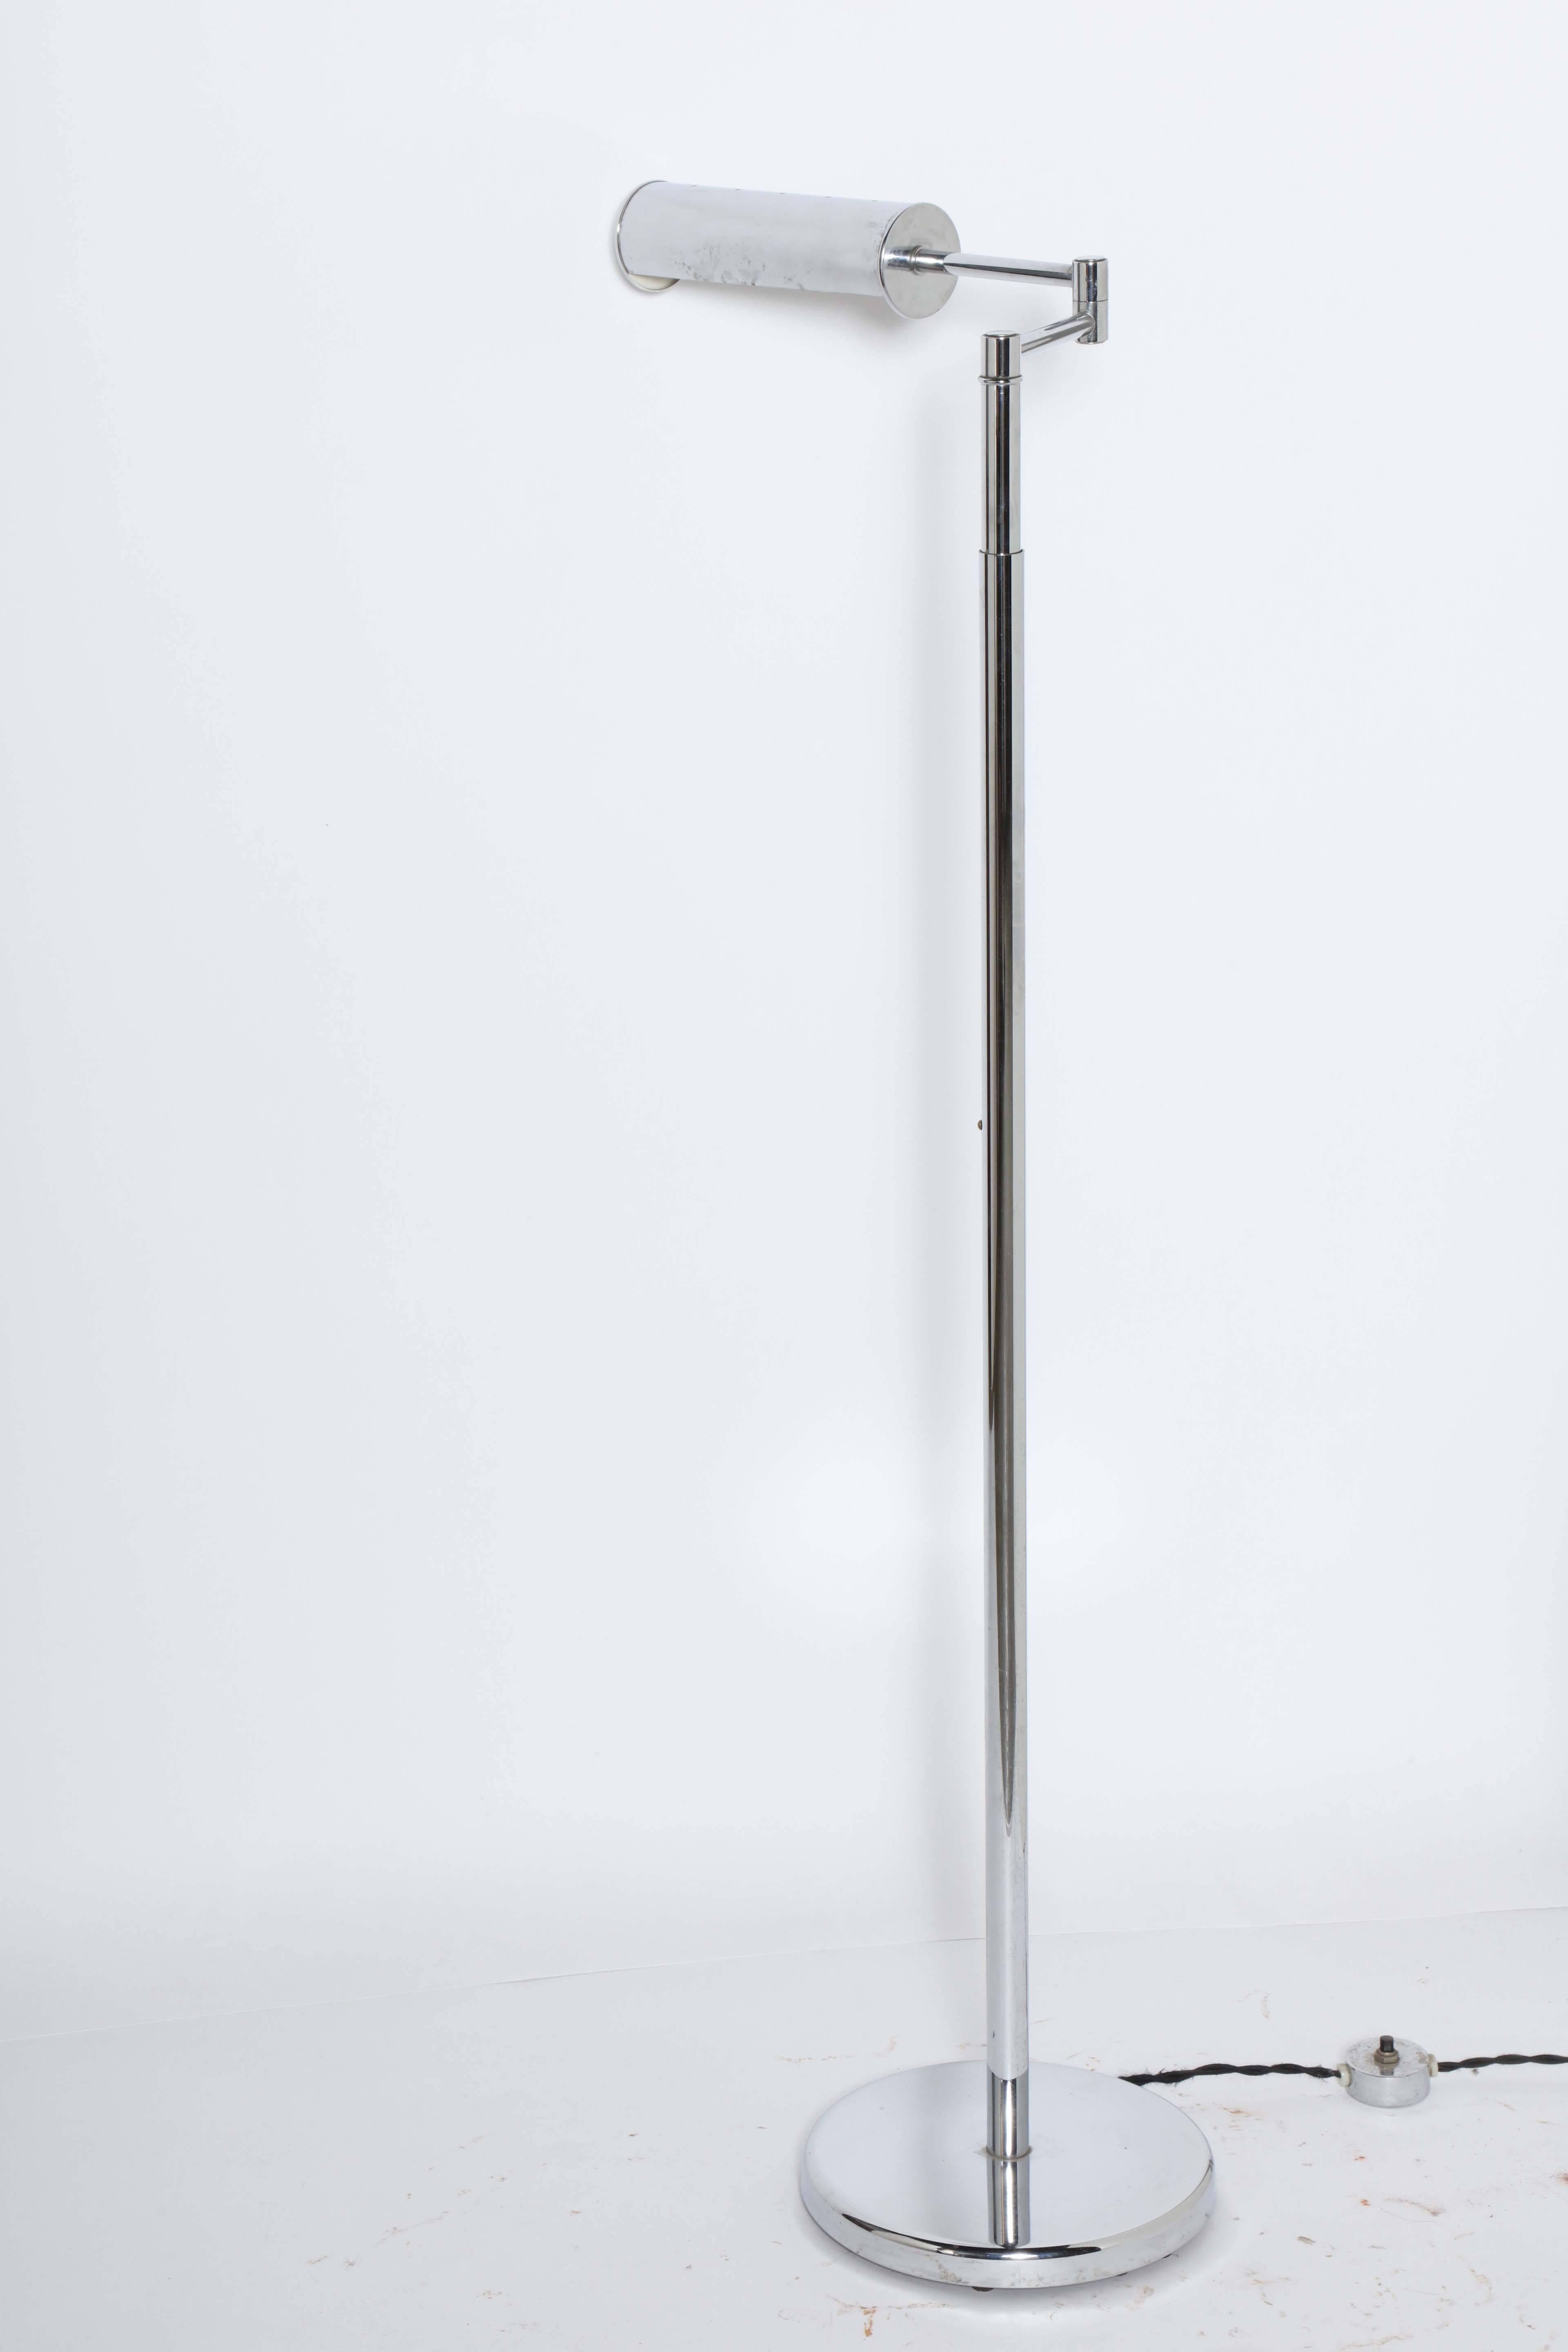 International Style Nessen Studios adjustable swing arm all chrome reading lamp, circa 1960s. Featuring adjustable height Chrome stem, reflective, vented cylindrical chrome shade atop a round chrome base. Lamp head measures 9L. Lamp width and arm